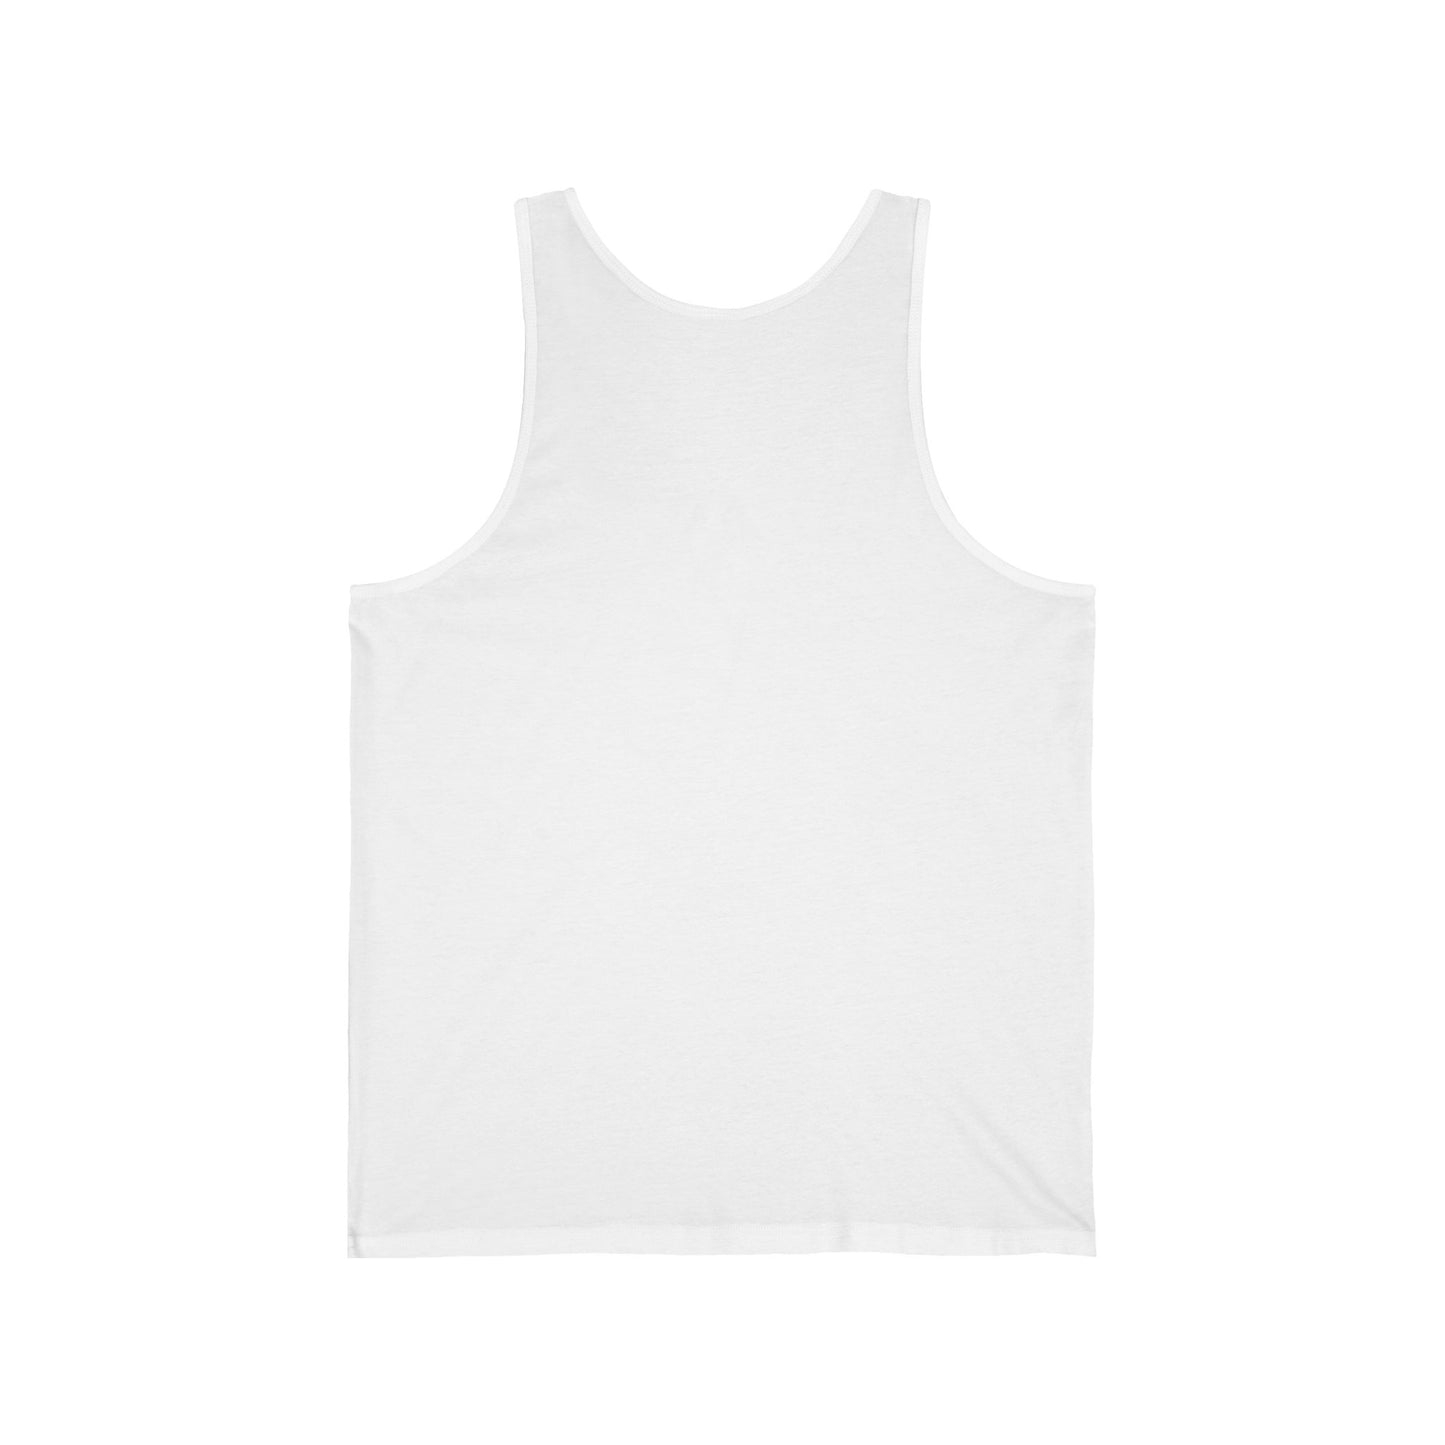 Press To Submit Tank Top - LeatherDaddy